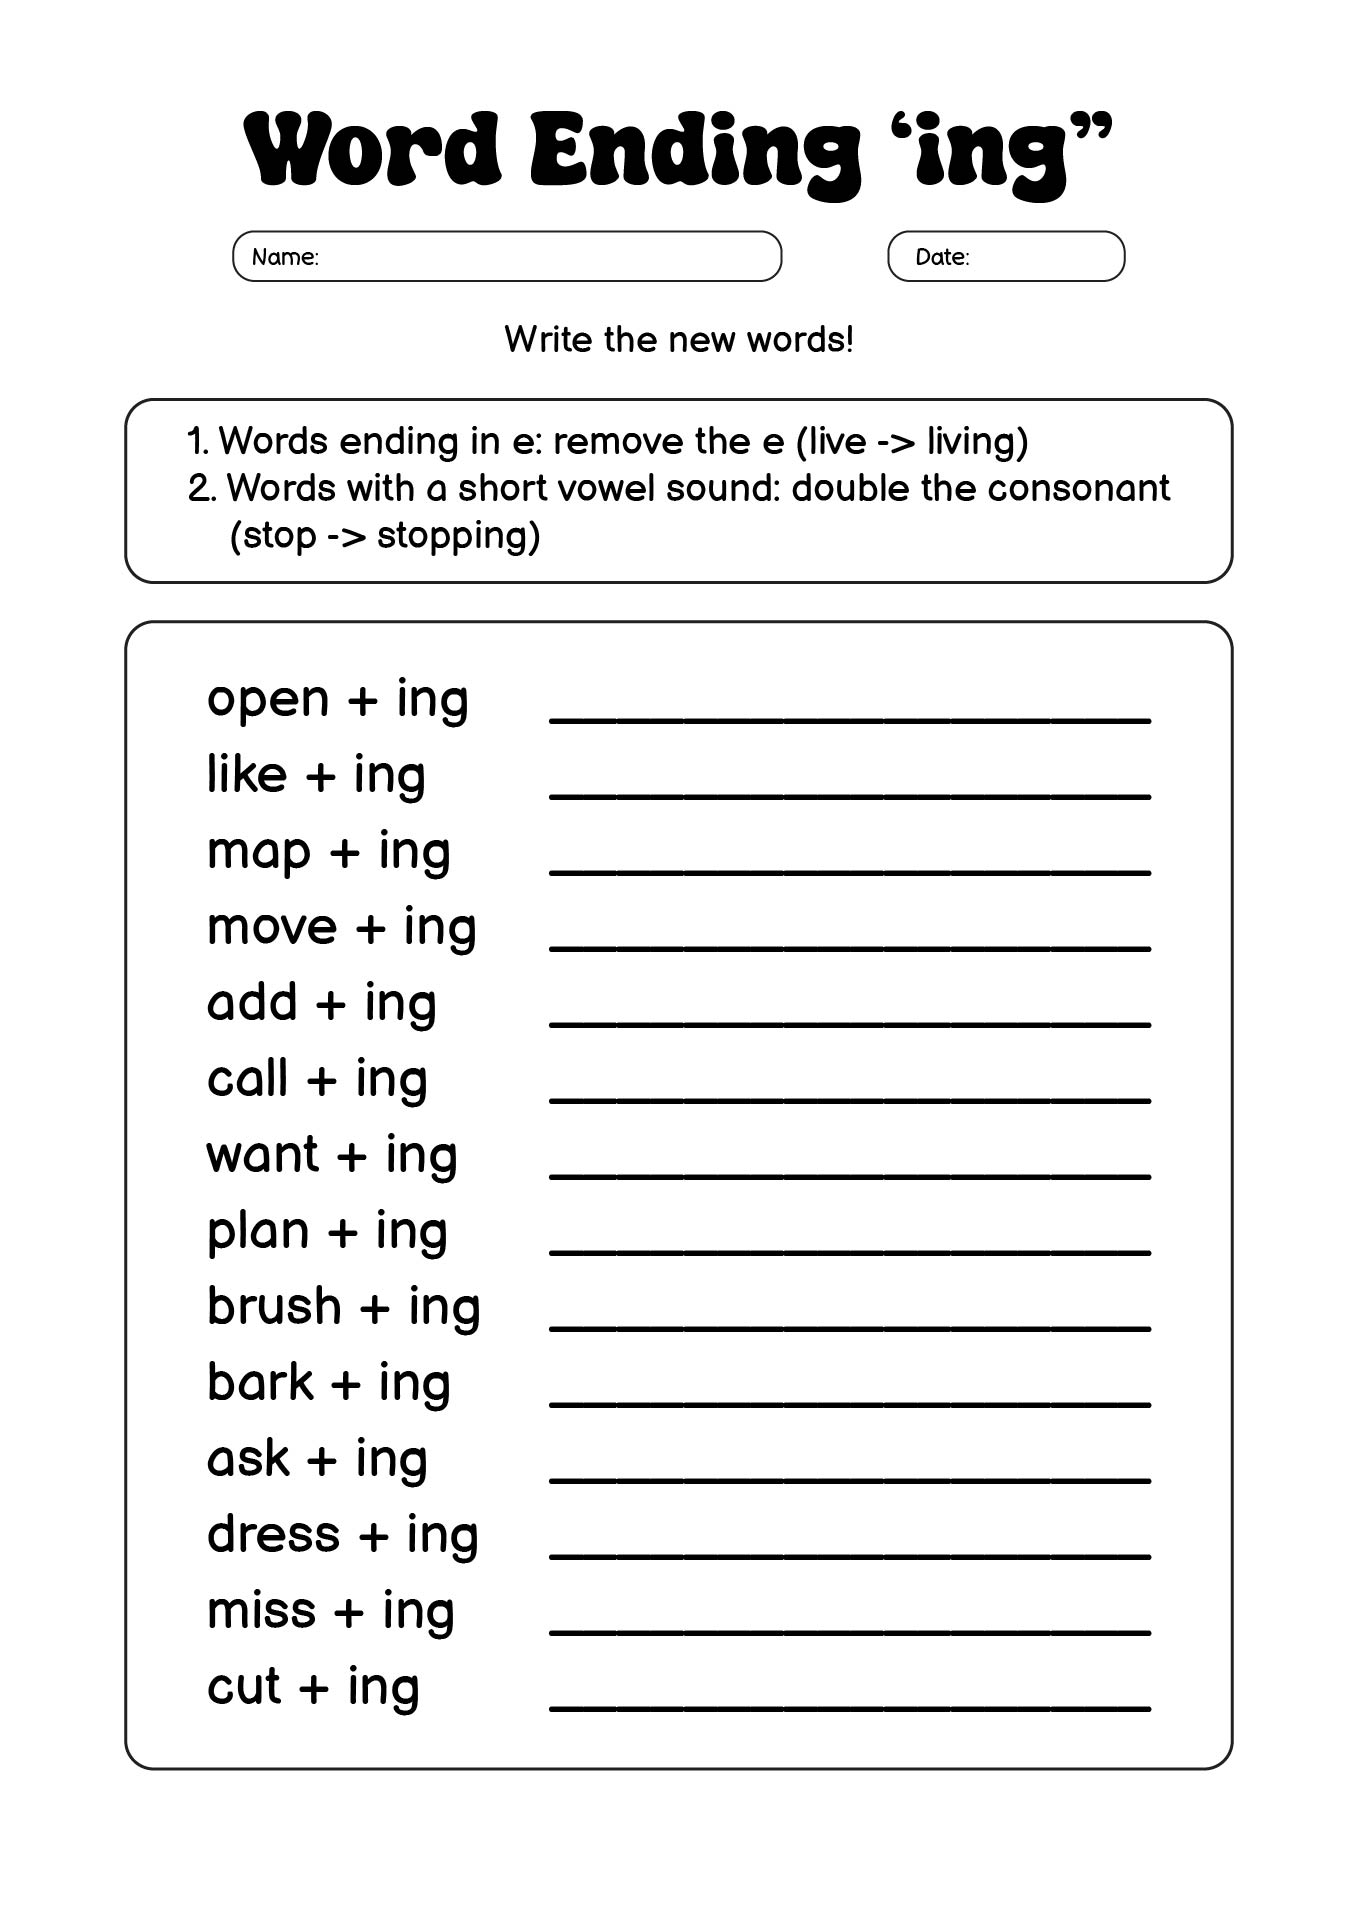 19 Best Images of Suffix ING Worksheets For First Grade - Suffixes